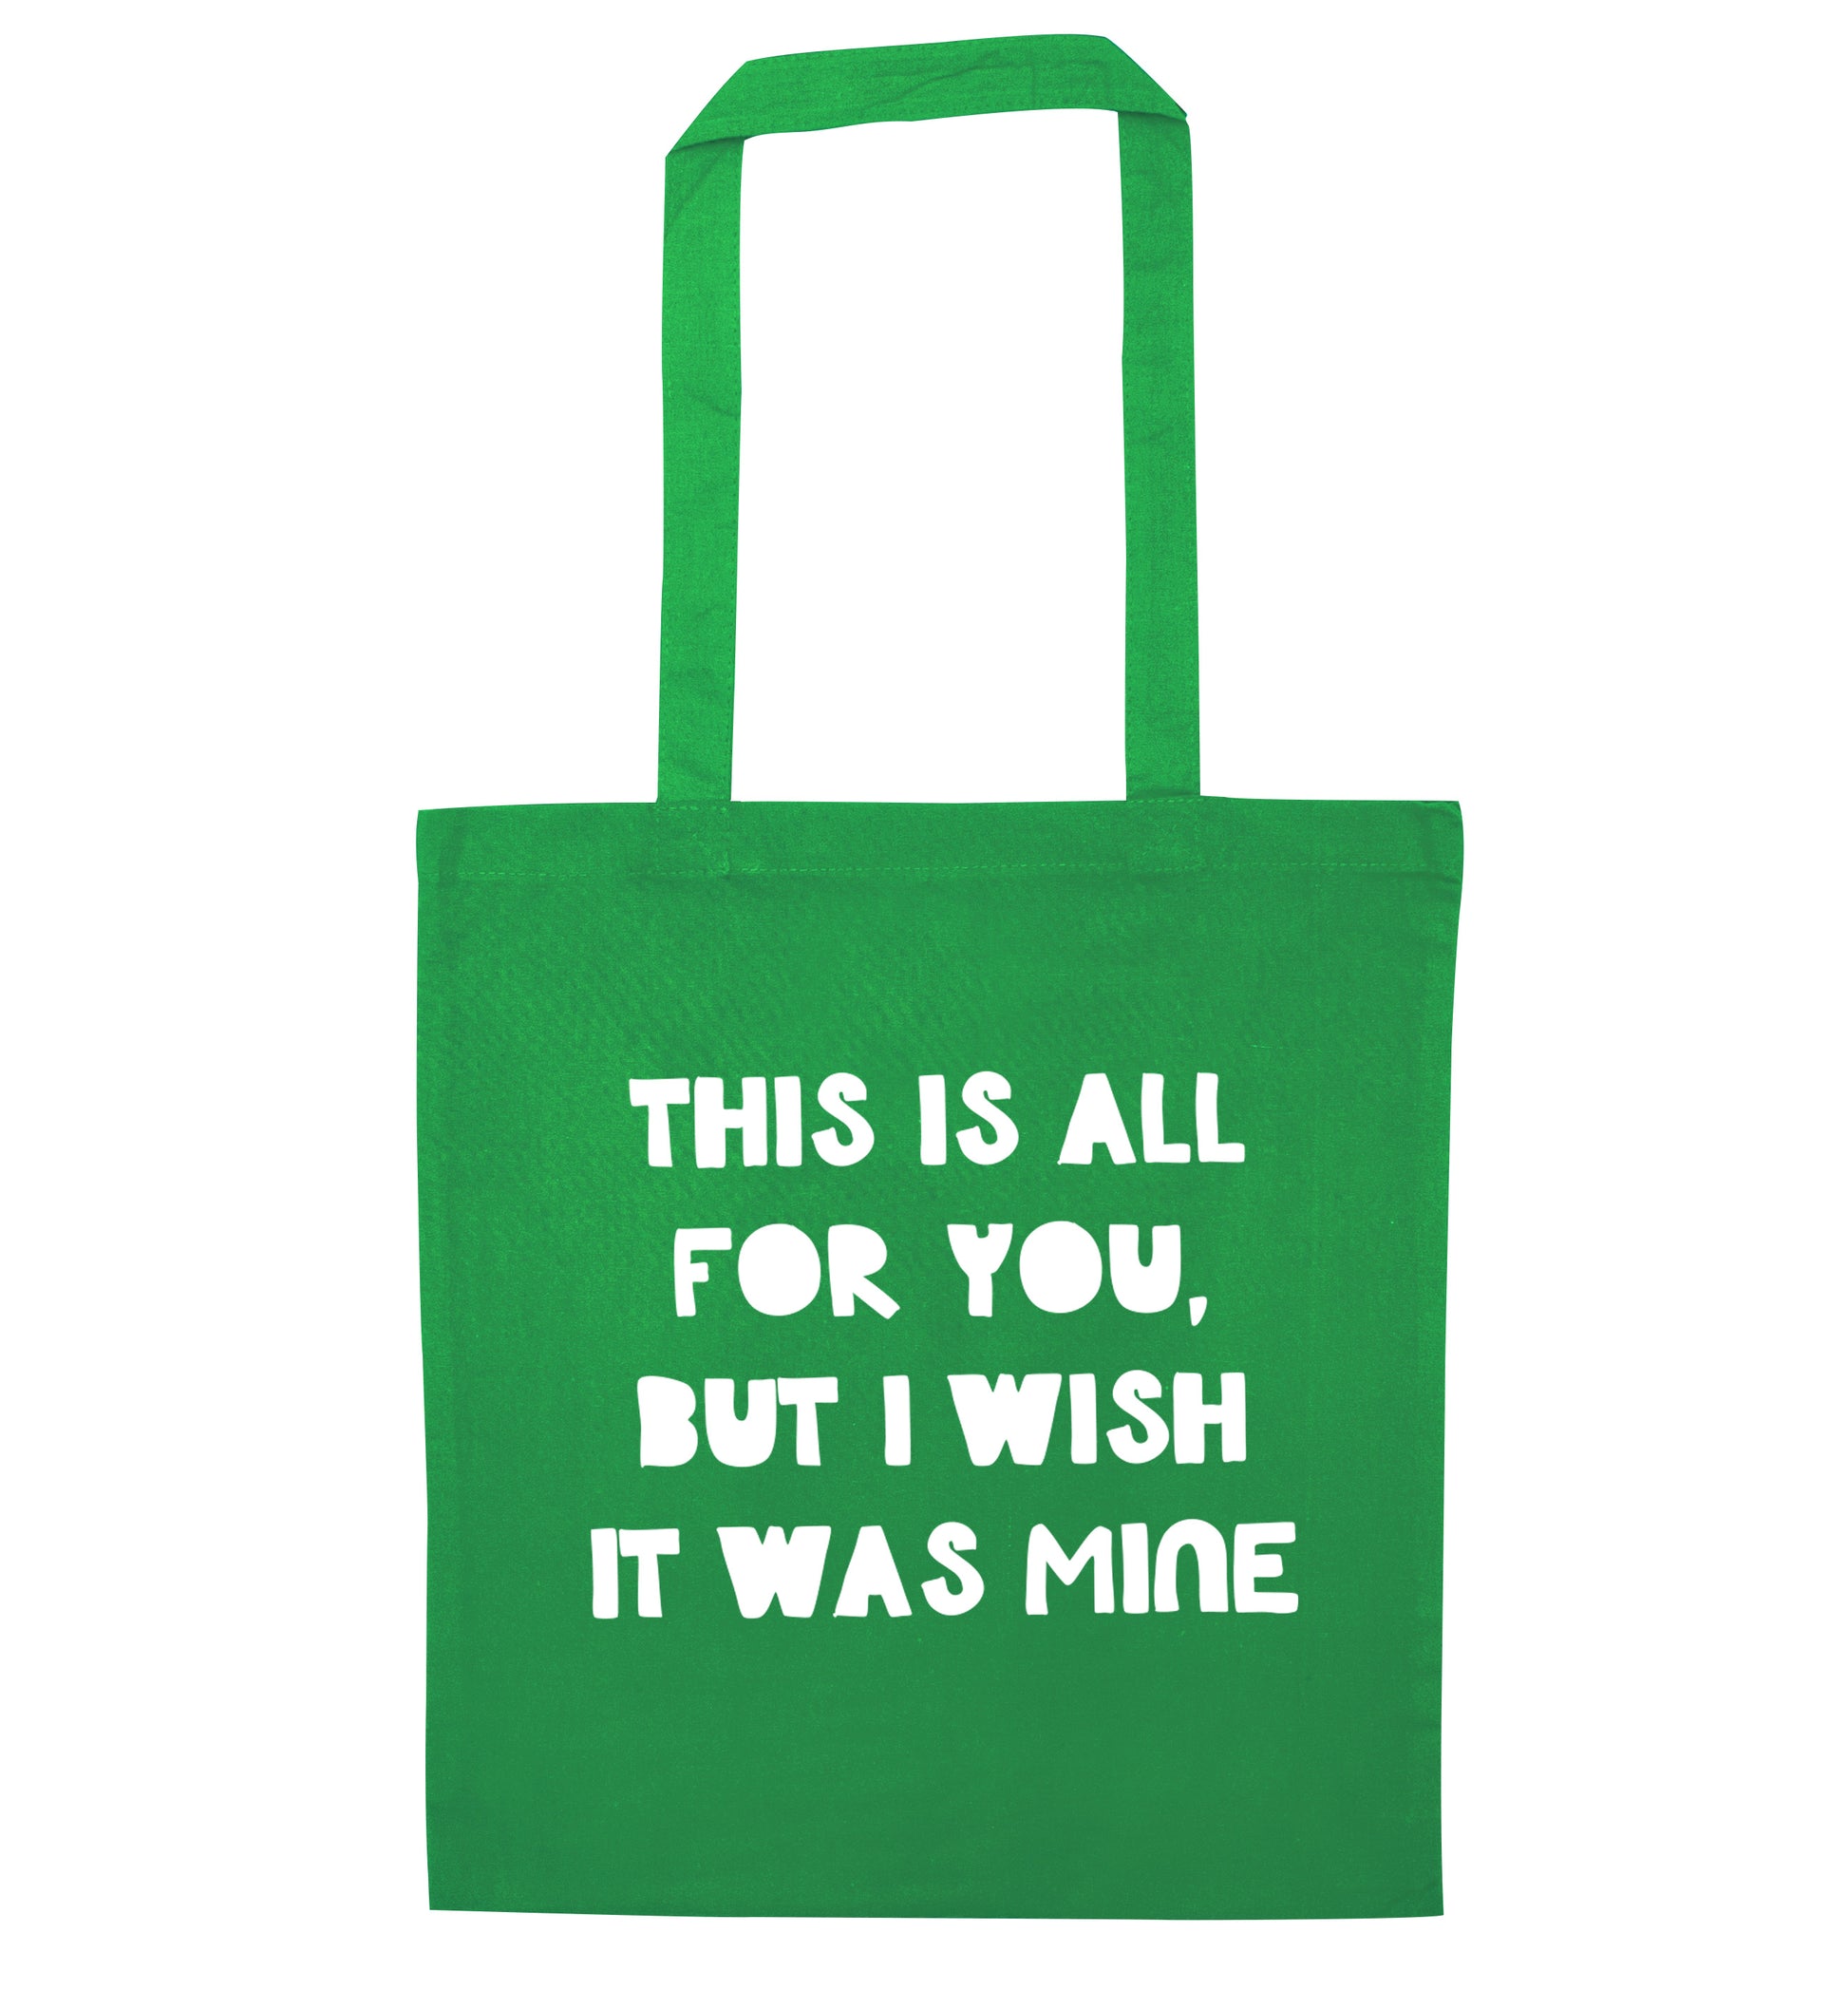 This is all for you but I wish it was mine green tote bag